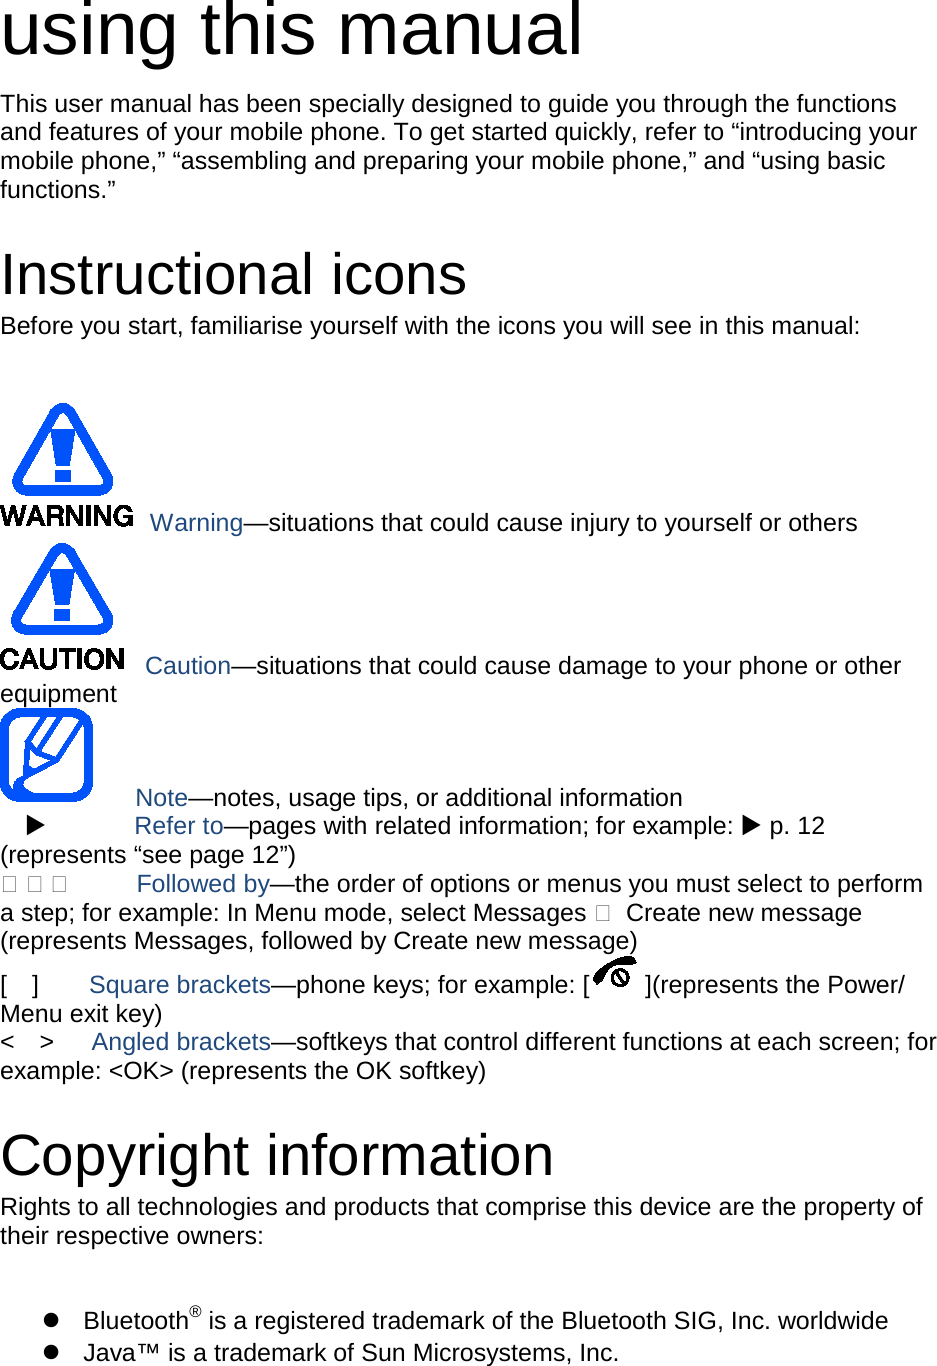 using this manual This user manual has been specially designed to guide you through the functions and features of your mobile phone. To get started quickly, refer to “introducing your mobile phone,” “assembling and preparing your mobile phone,” and “using basic functions.”  Instructional icons Before you start, familiarise yourself with the icons you will see in this manual:     Warning—situations that could cause injury to yourself or others  Caution—situations that could cause damage to your phone or other equipment    Note—notes, usage tips, or additional information          Refer to—pages with related information; for example:  p. 12 (represents “see page 12”)      Followed by—the order of options or menus you must select to perform a step; for example: In Menu mode, select Messages  Create new message (represents Messages, followed by Create new message) [  ]    Square brackets—phone keys; for example: [ ](represents the Power/ Menu exit key) &lt;  &gt;   Angled brackets—softkeys that control different functions at each screen; for example: &lt;OK&gt; (represents the OK softkey)  Copyright information Rights to all technologies and products that comprise this device are the property of their respective owners:   Bluetooth® is a registered trademark of the Bluetooth SIG, Inc. worldwide  Java™ is a trademark of Sun Microsystems, Inc.  